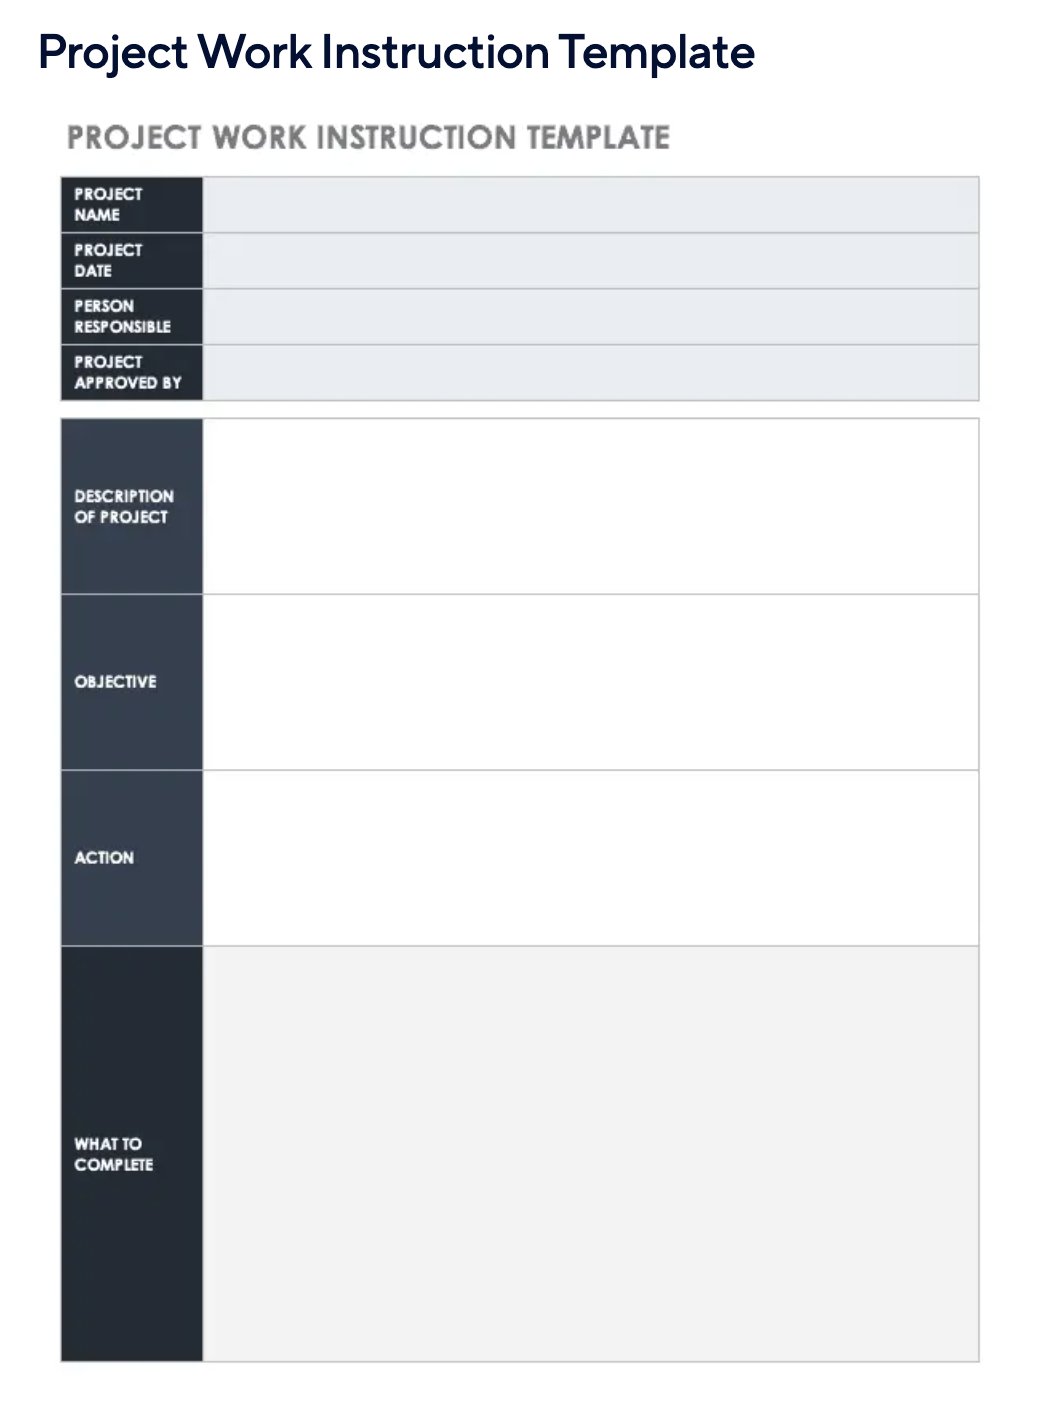 Top Page of work instruction template